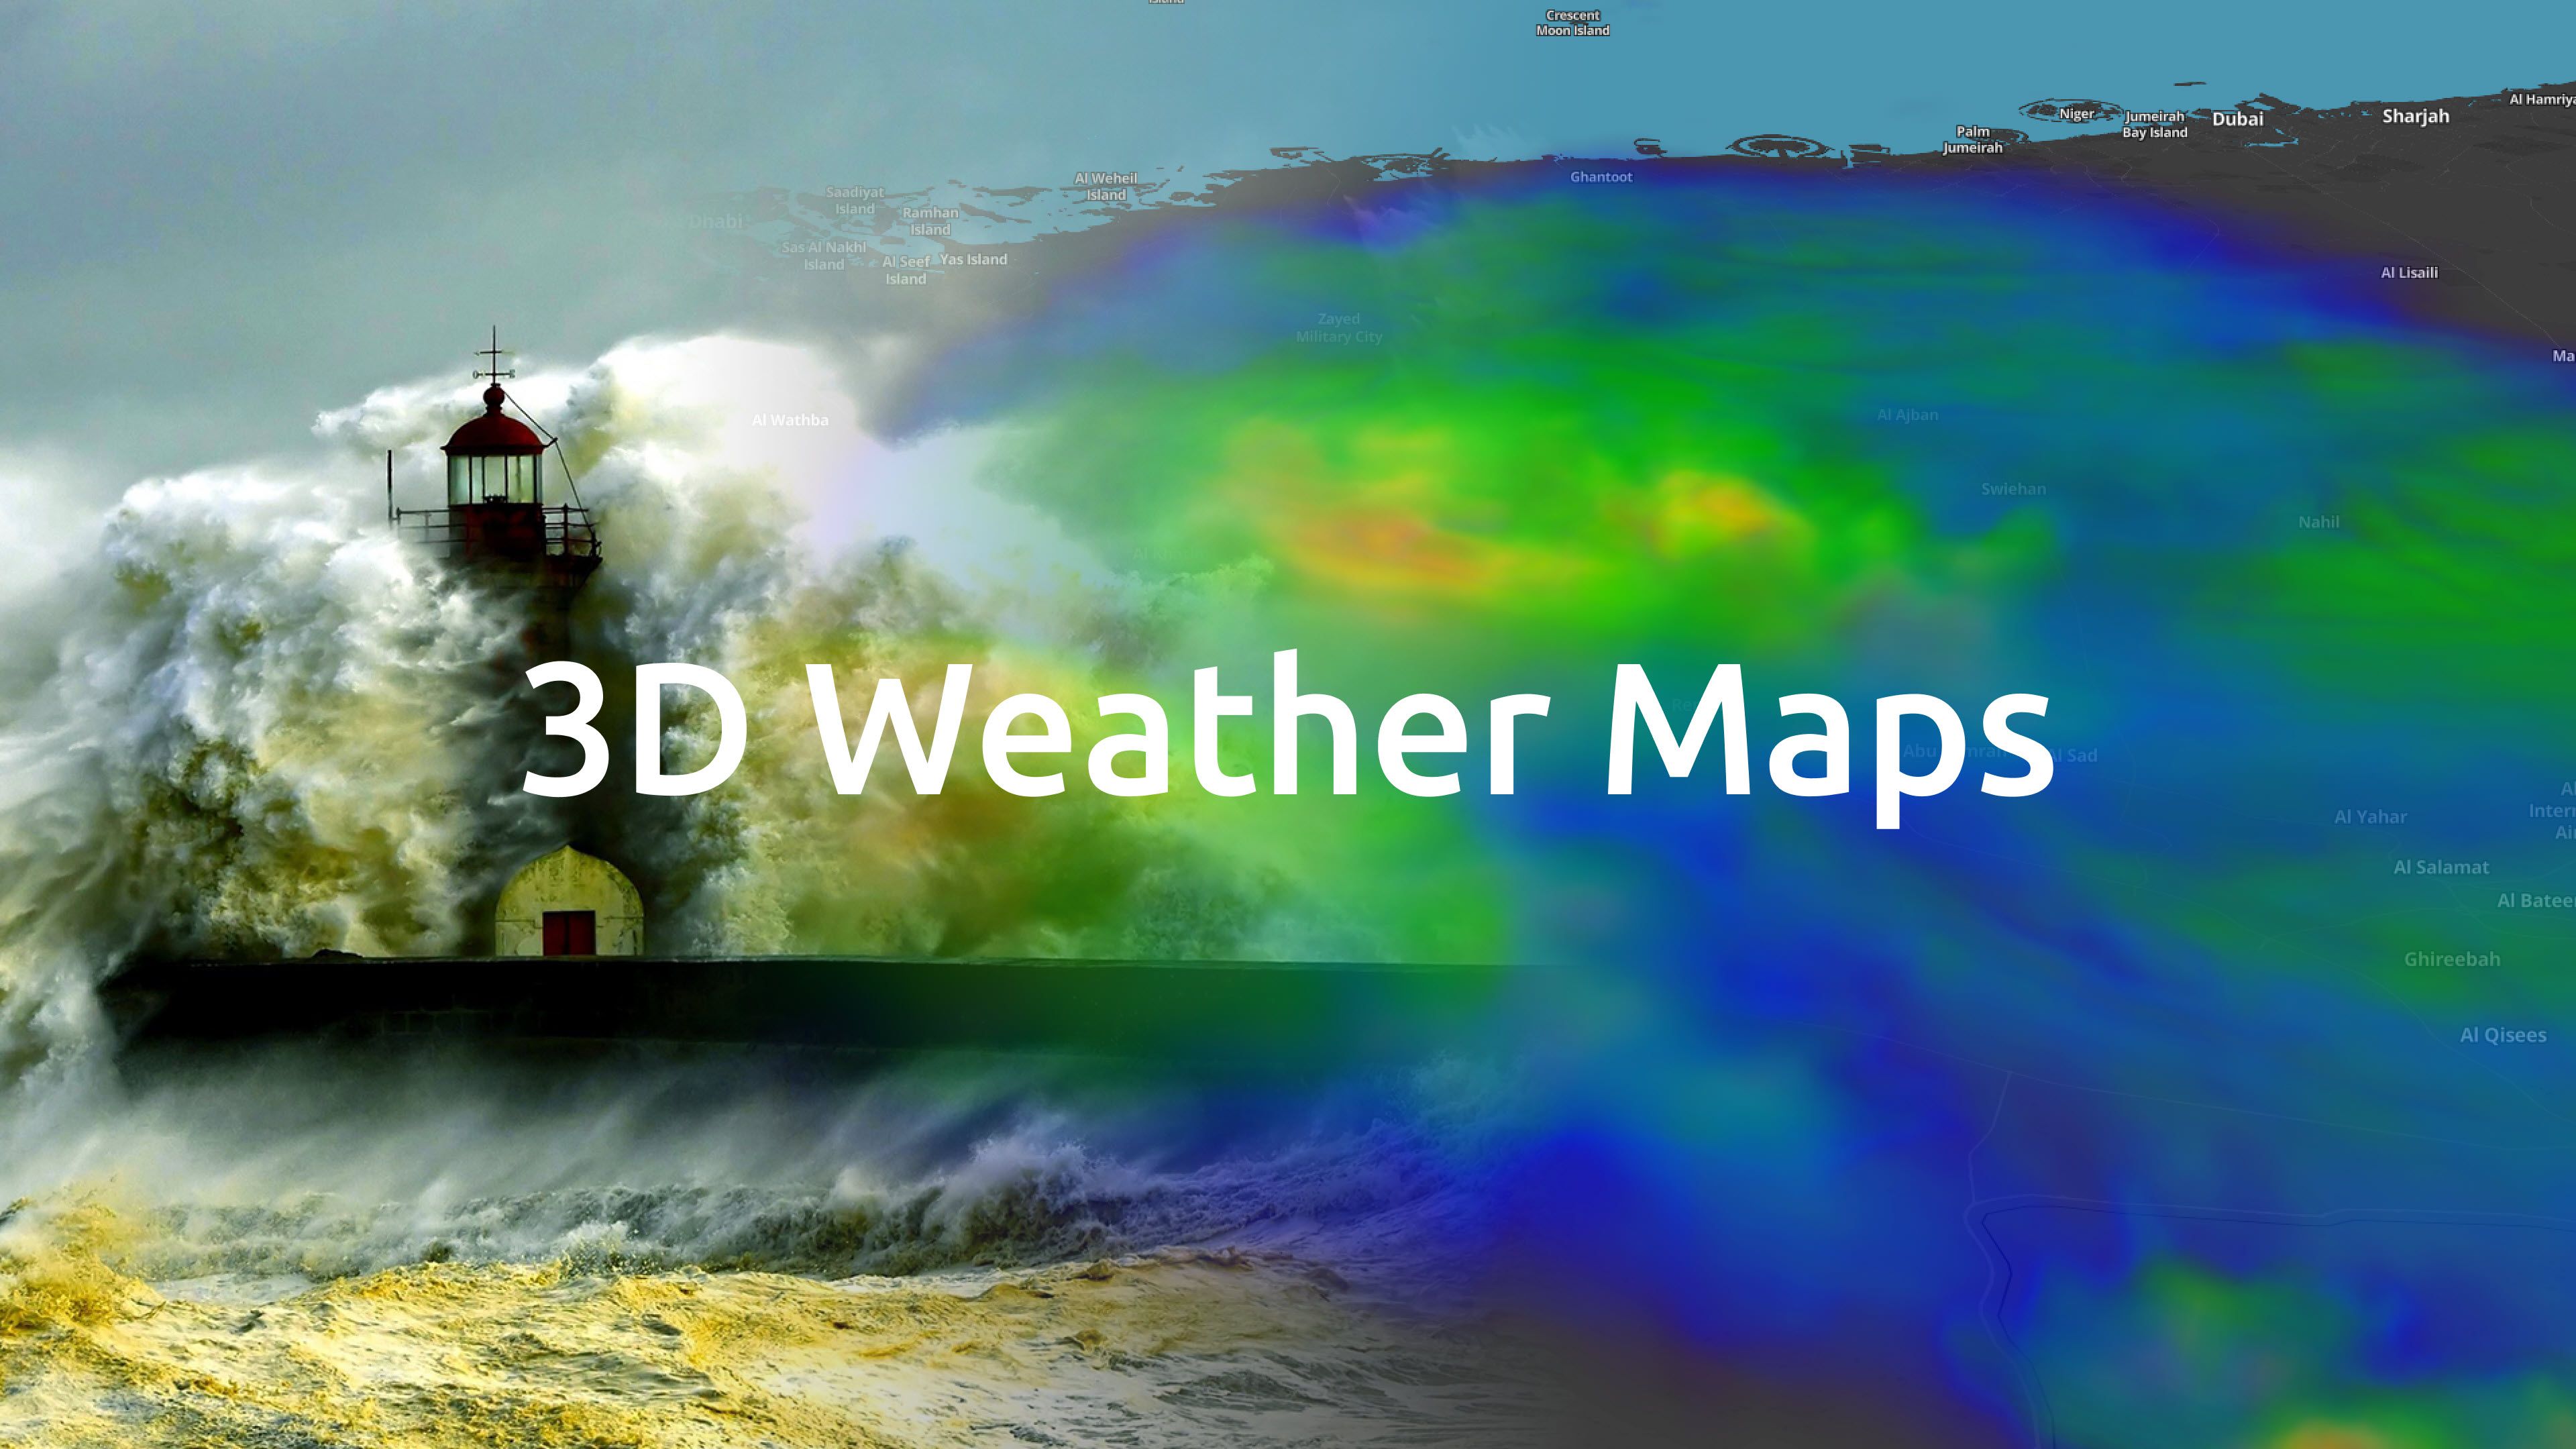 3D weather maps